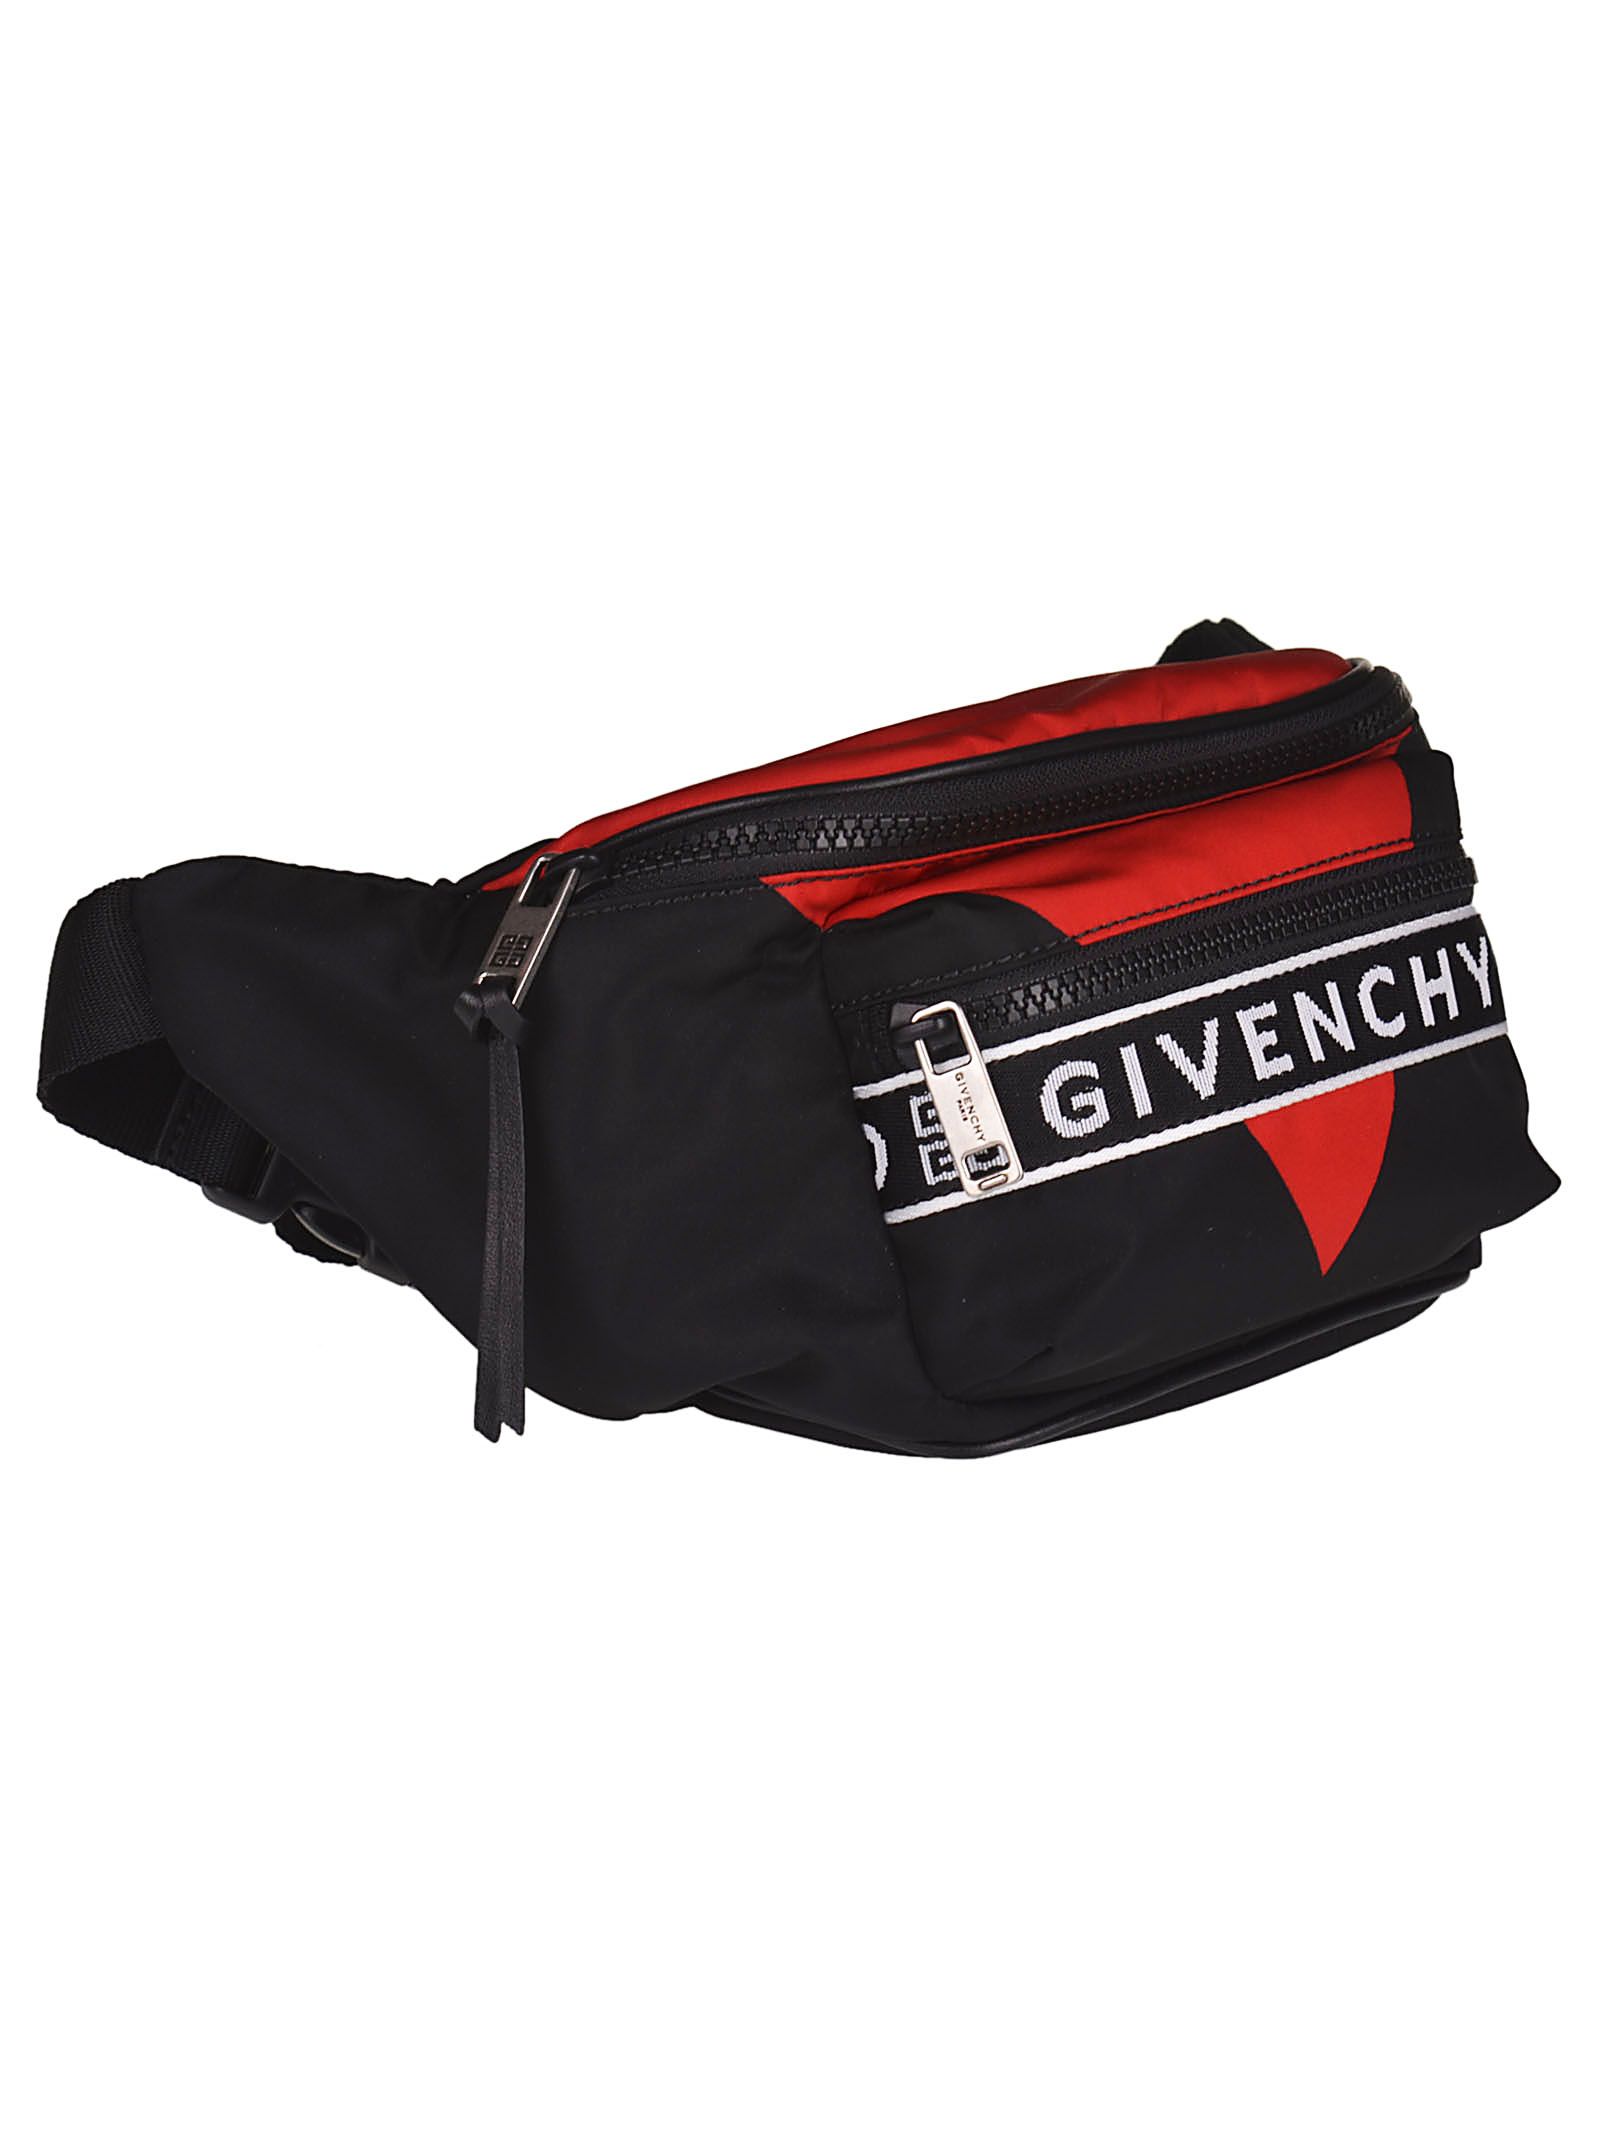 Givenchy Givenchy Embroidered Logo Belt Bag - Black/red - 10895632 | italist